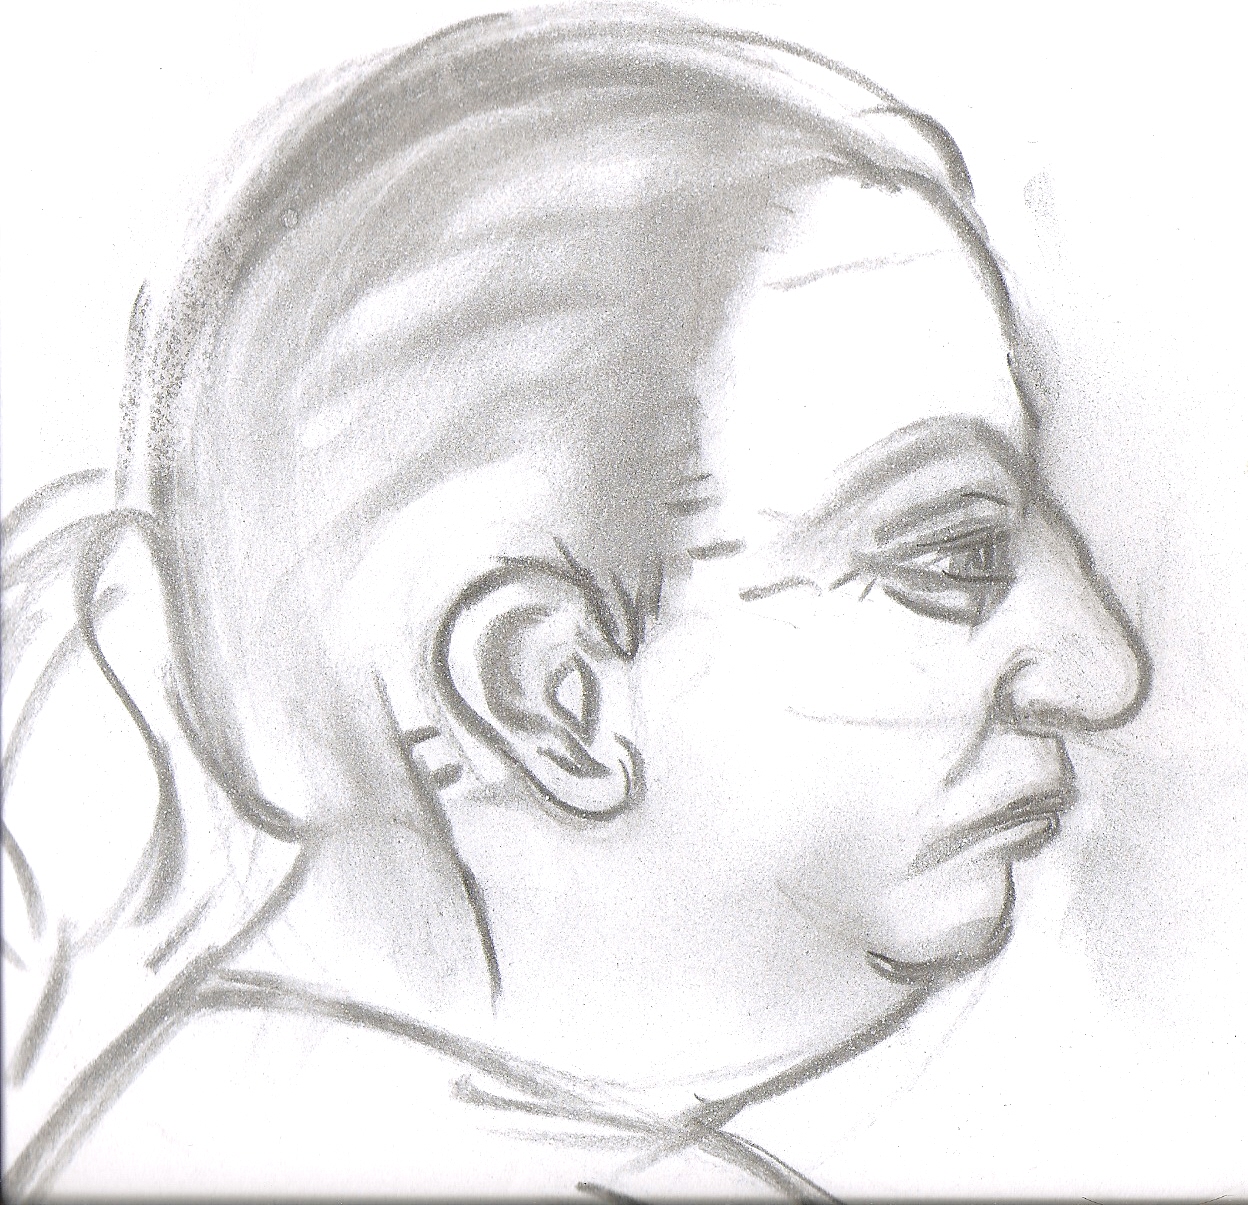 Contour Drawing of the Head